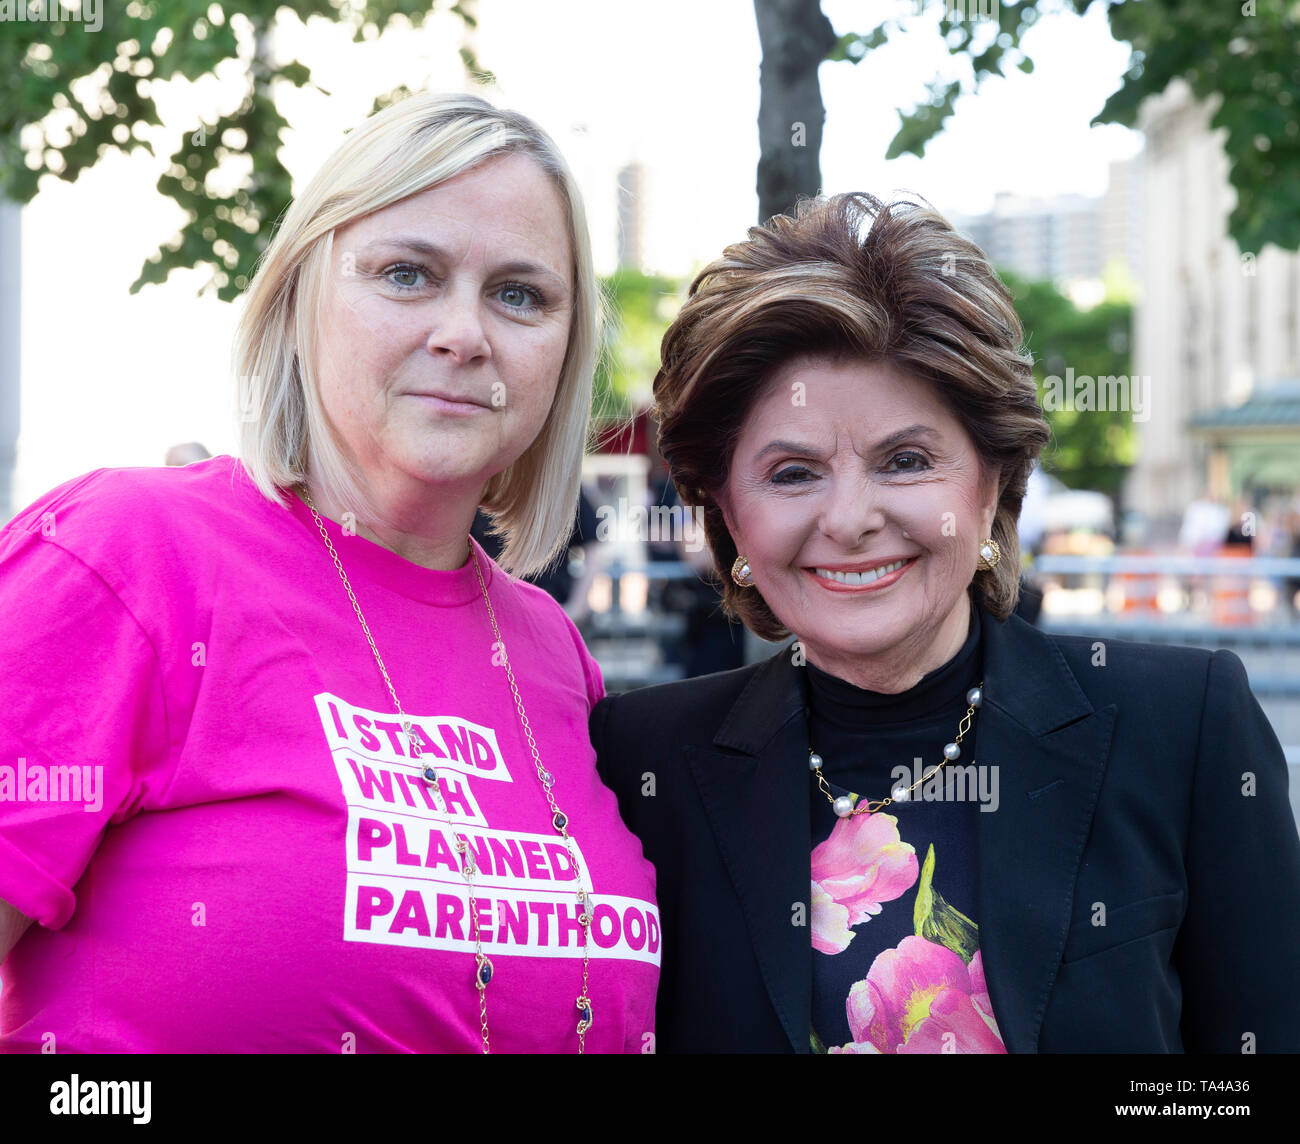 New York, NY - May 21, 2019: Laura McQuade and attorney Gloria Allred attend pro-choice rally for women rights organized by Planned Parenthood on Foley Square Stock Photo